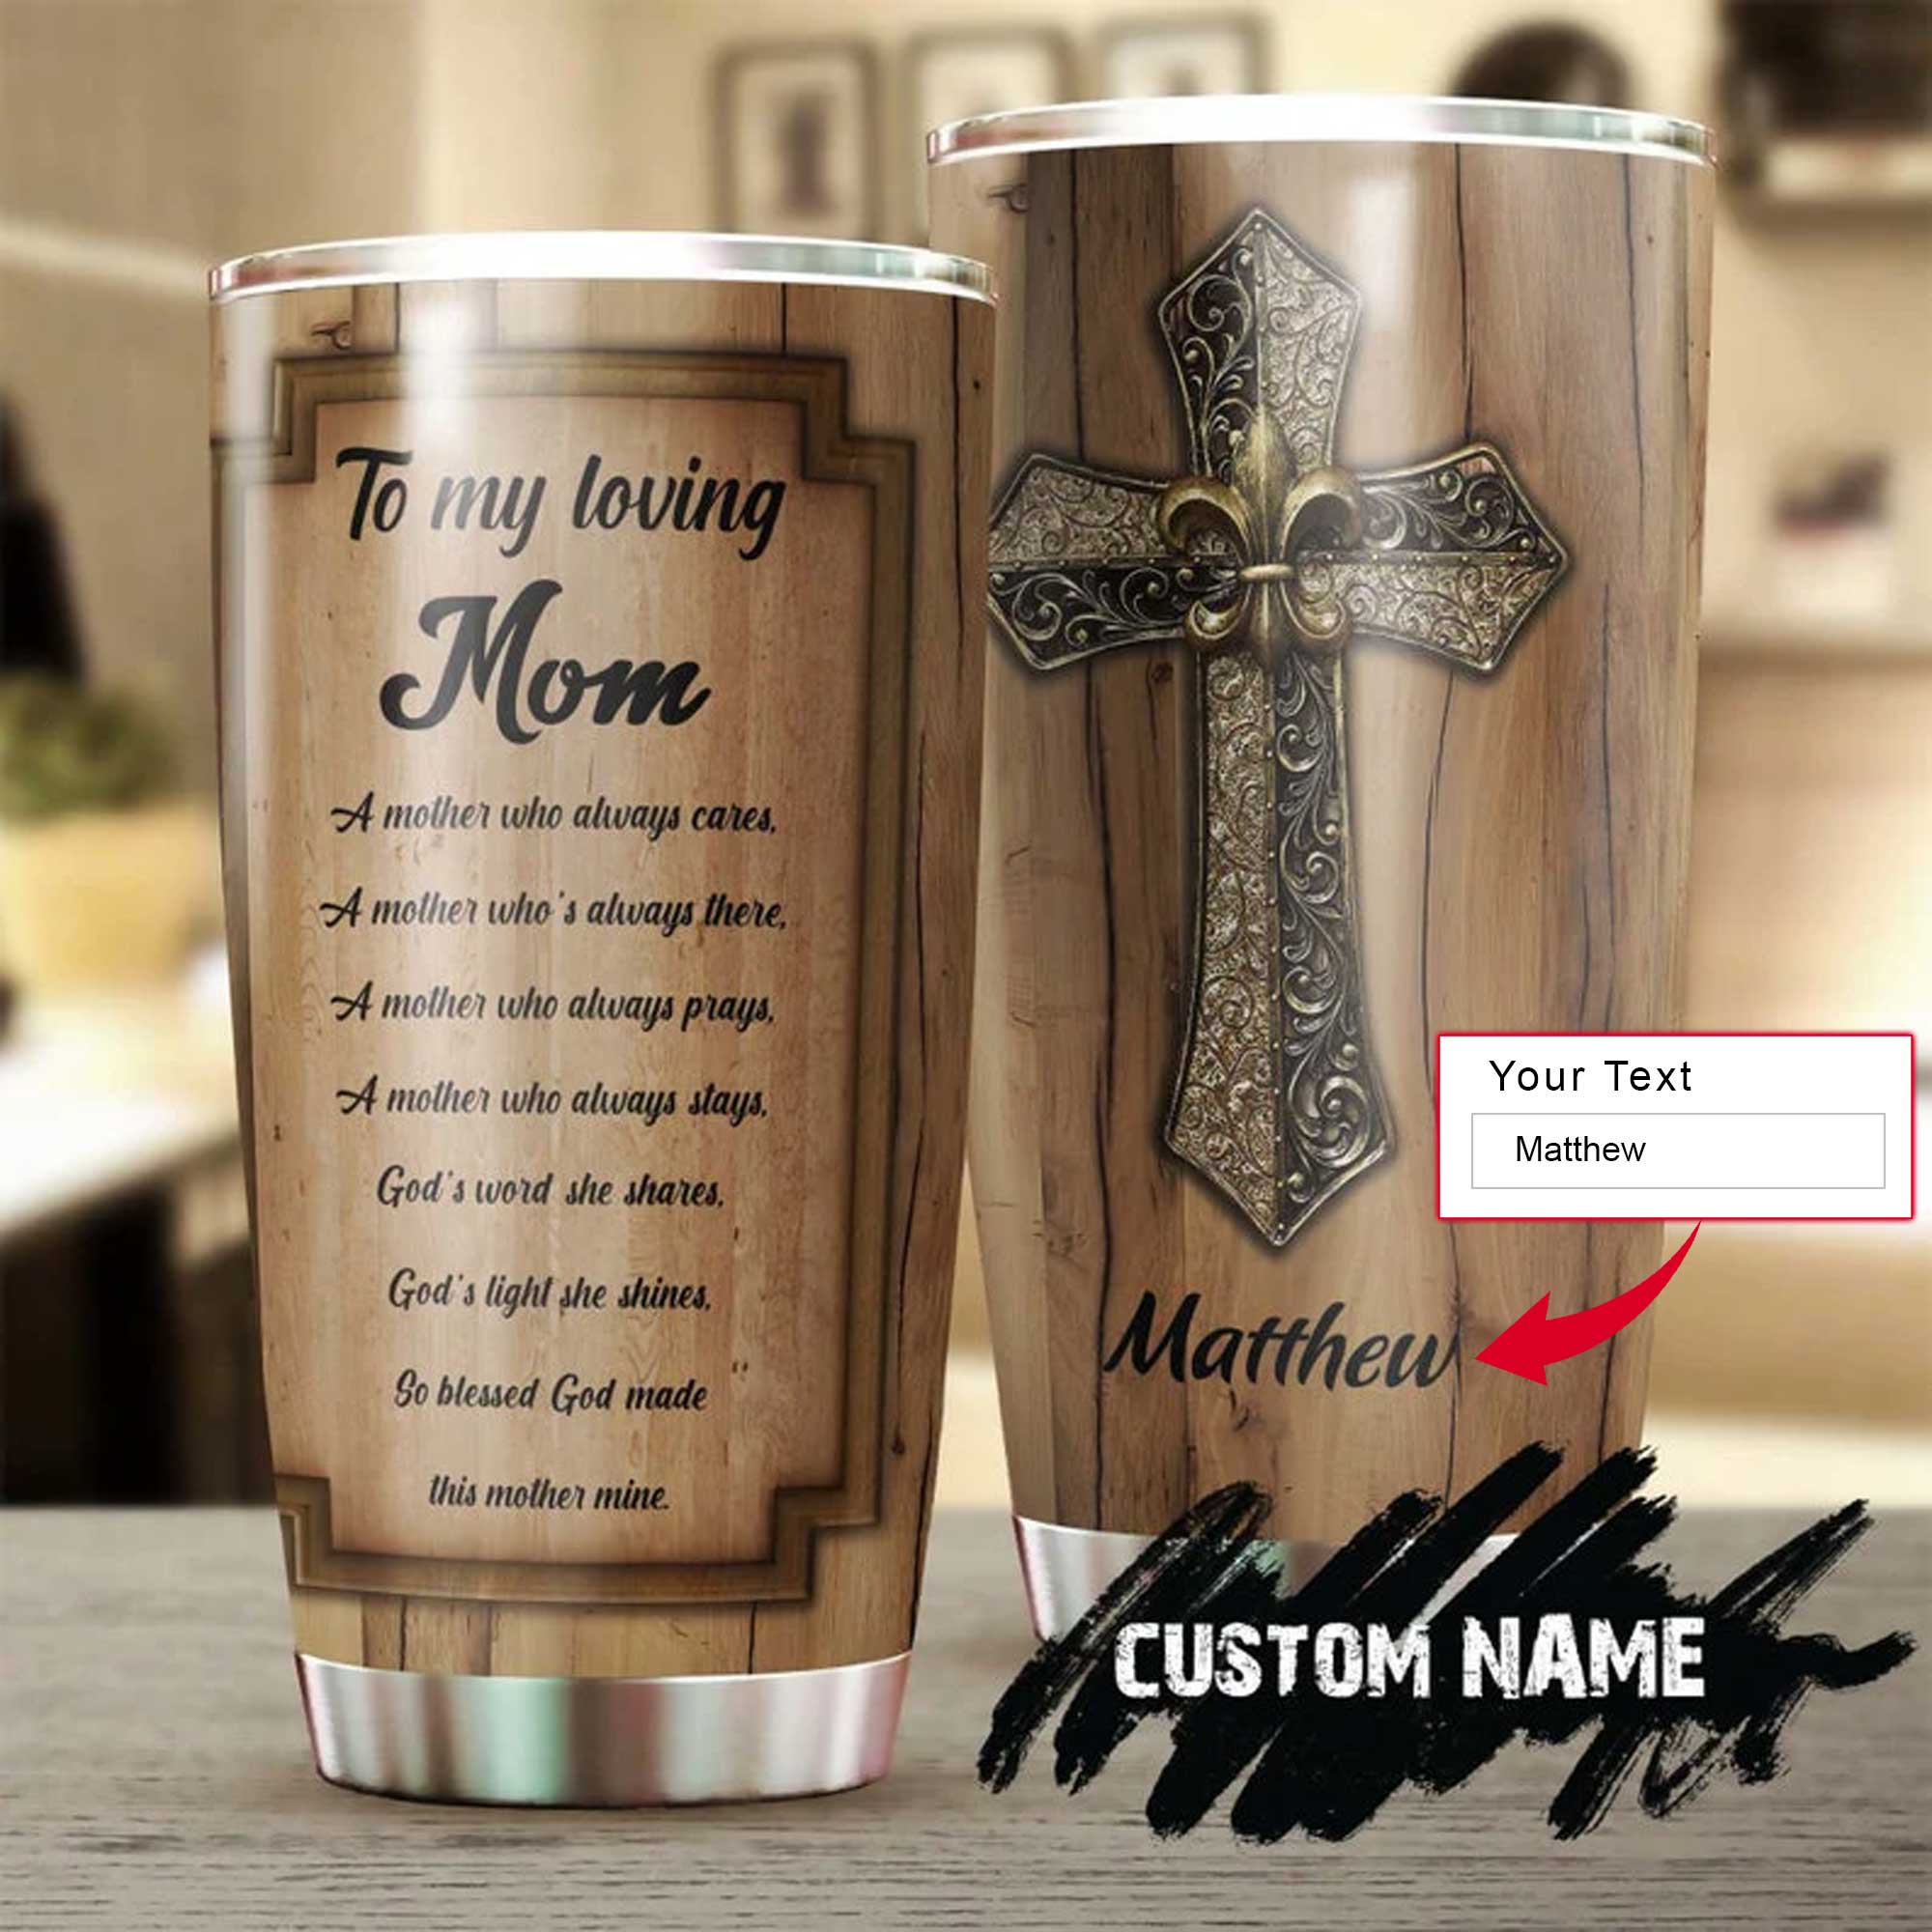 Jesus Personalized Mother's Day Gift Tumbler - Custom Gift For Mother's Day, Presents For Mom - Christian Mom God Made You My Mom Metal Cross Tumbler